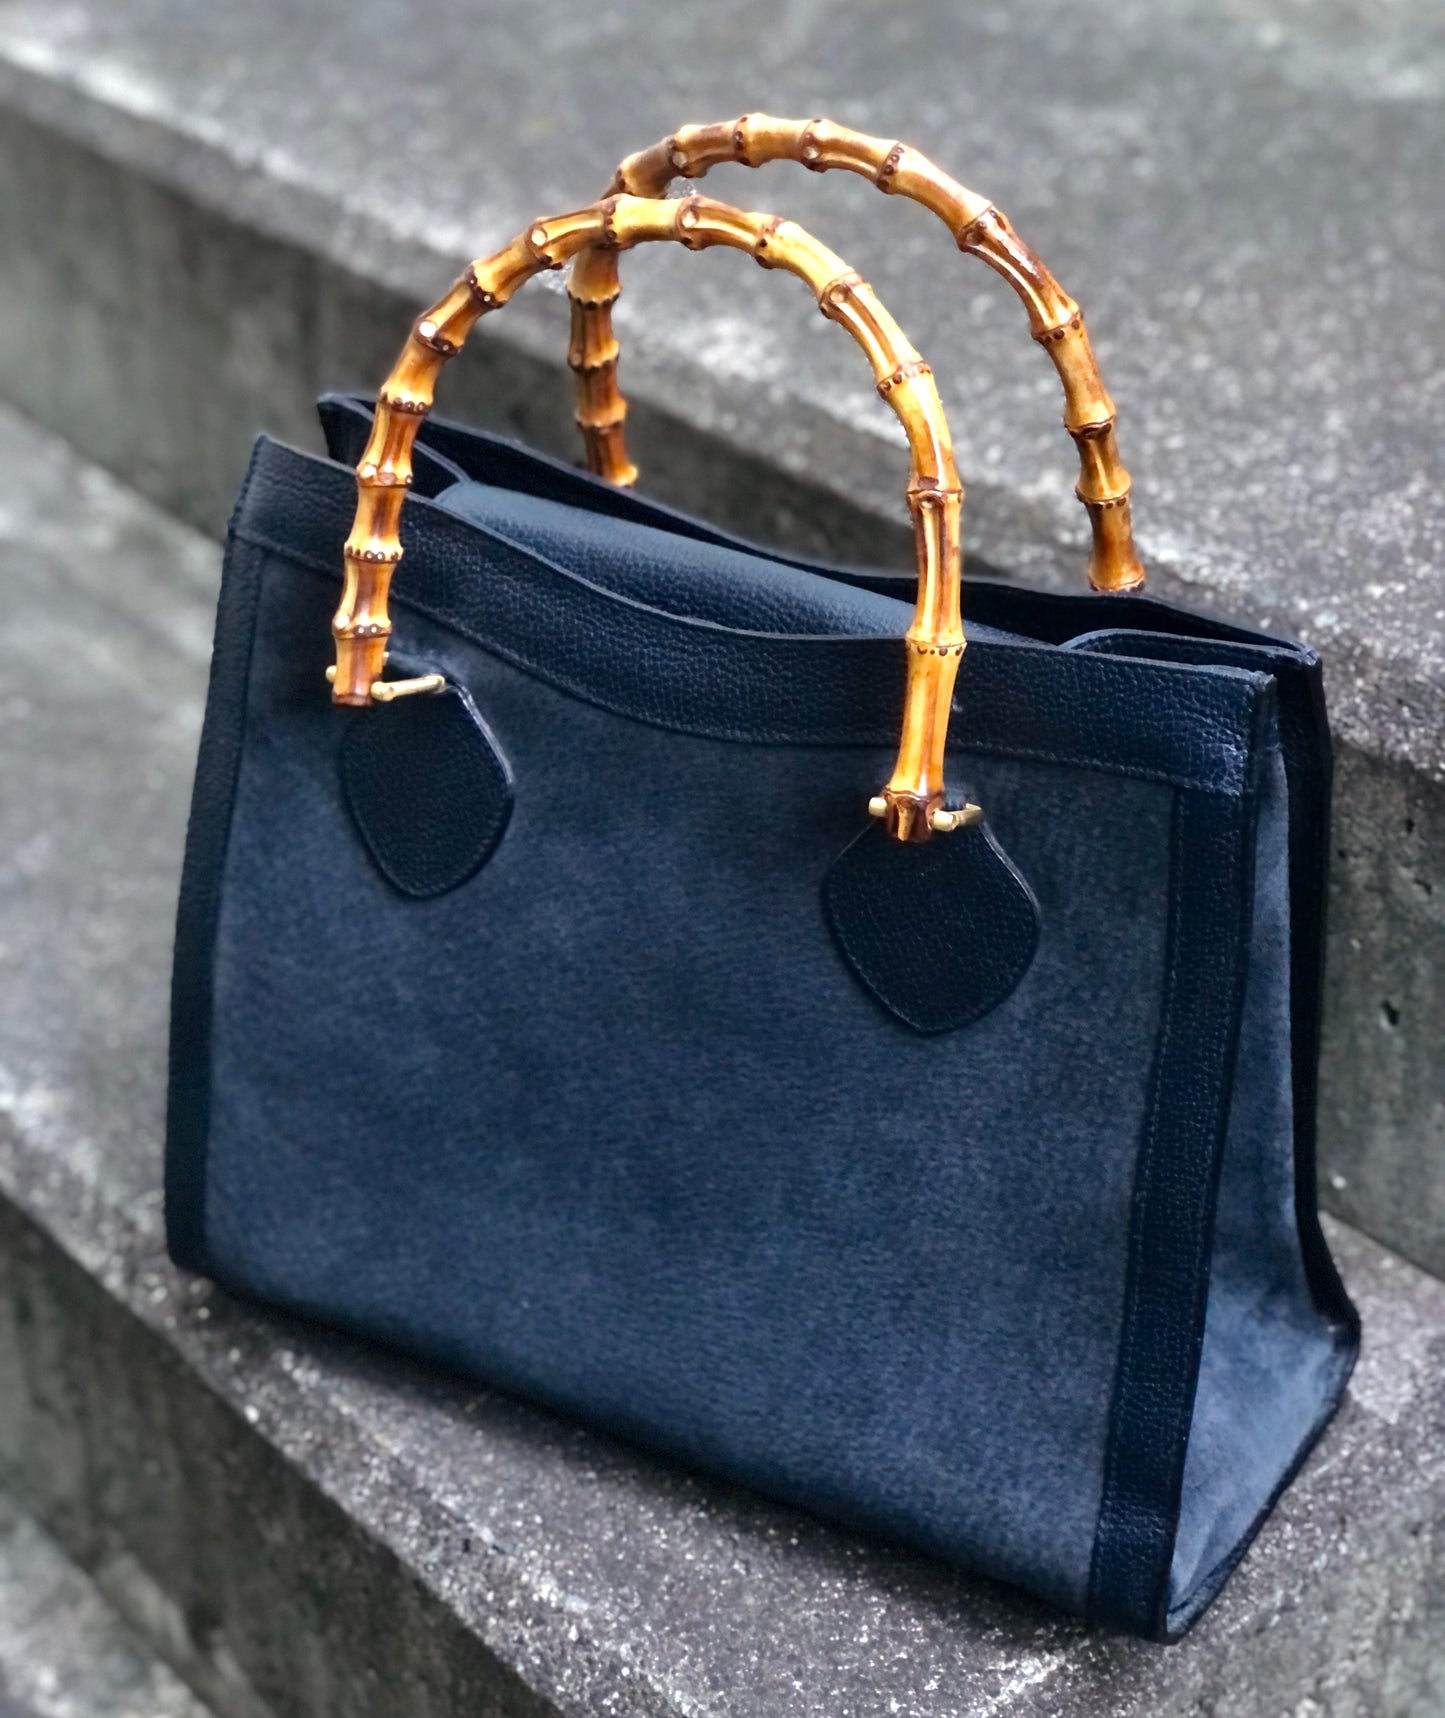 Gucci Large Suede Bamboo Tote